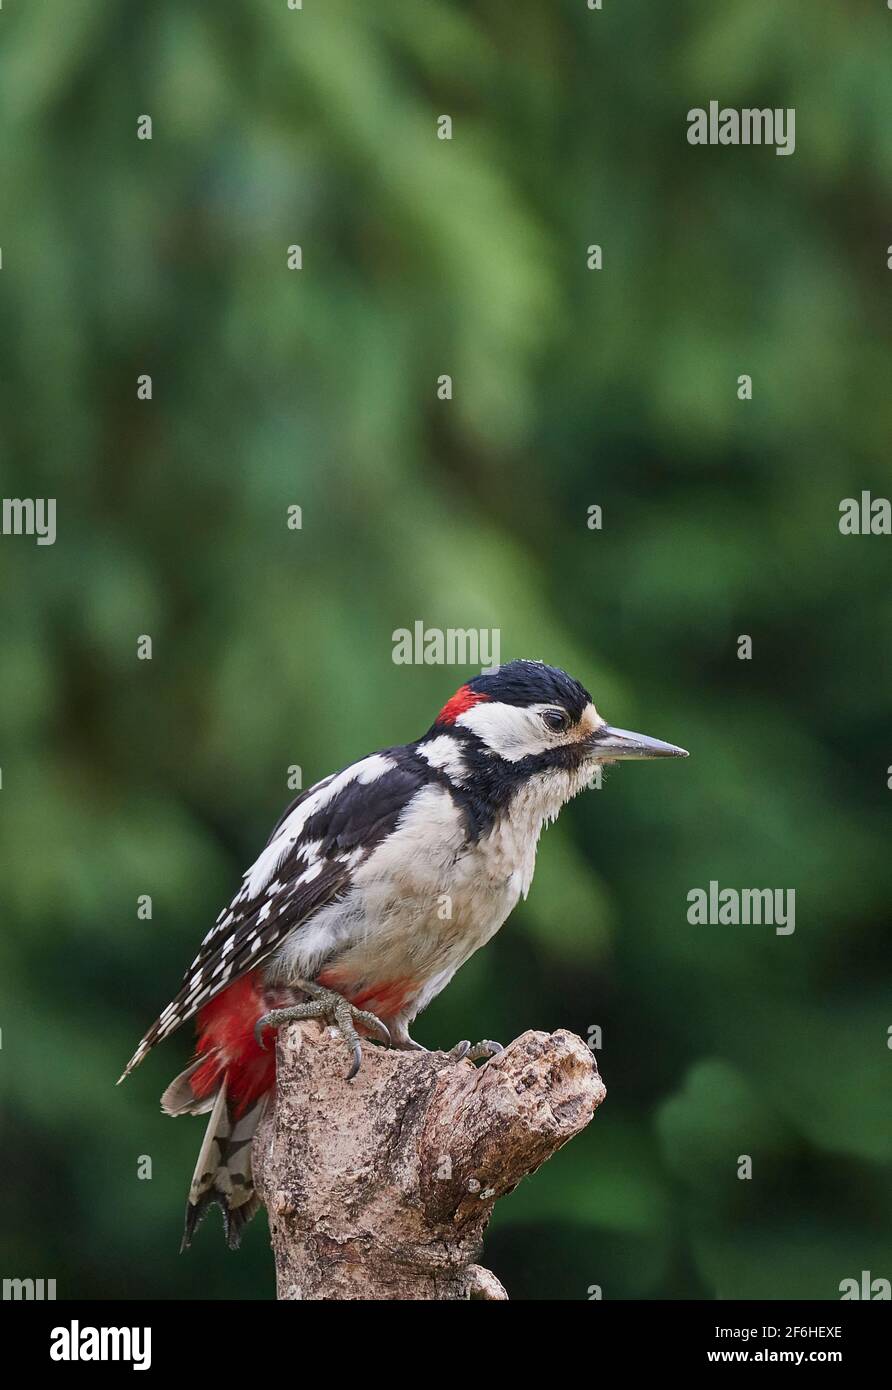 A single male Great Spotted Woodpecker (Dendrocopos Major) sitting on top of a large branch with a blurred green background Stock Photo